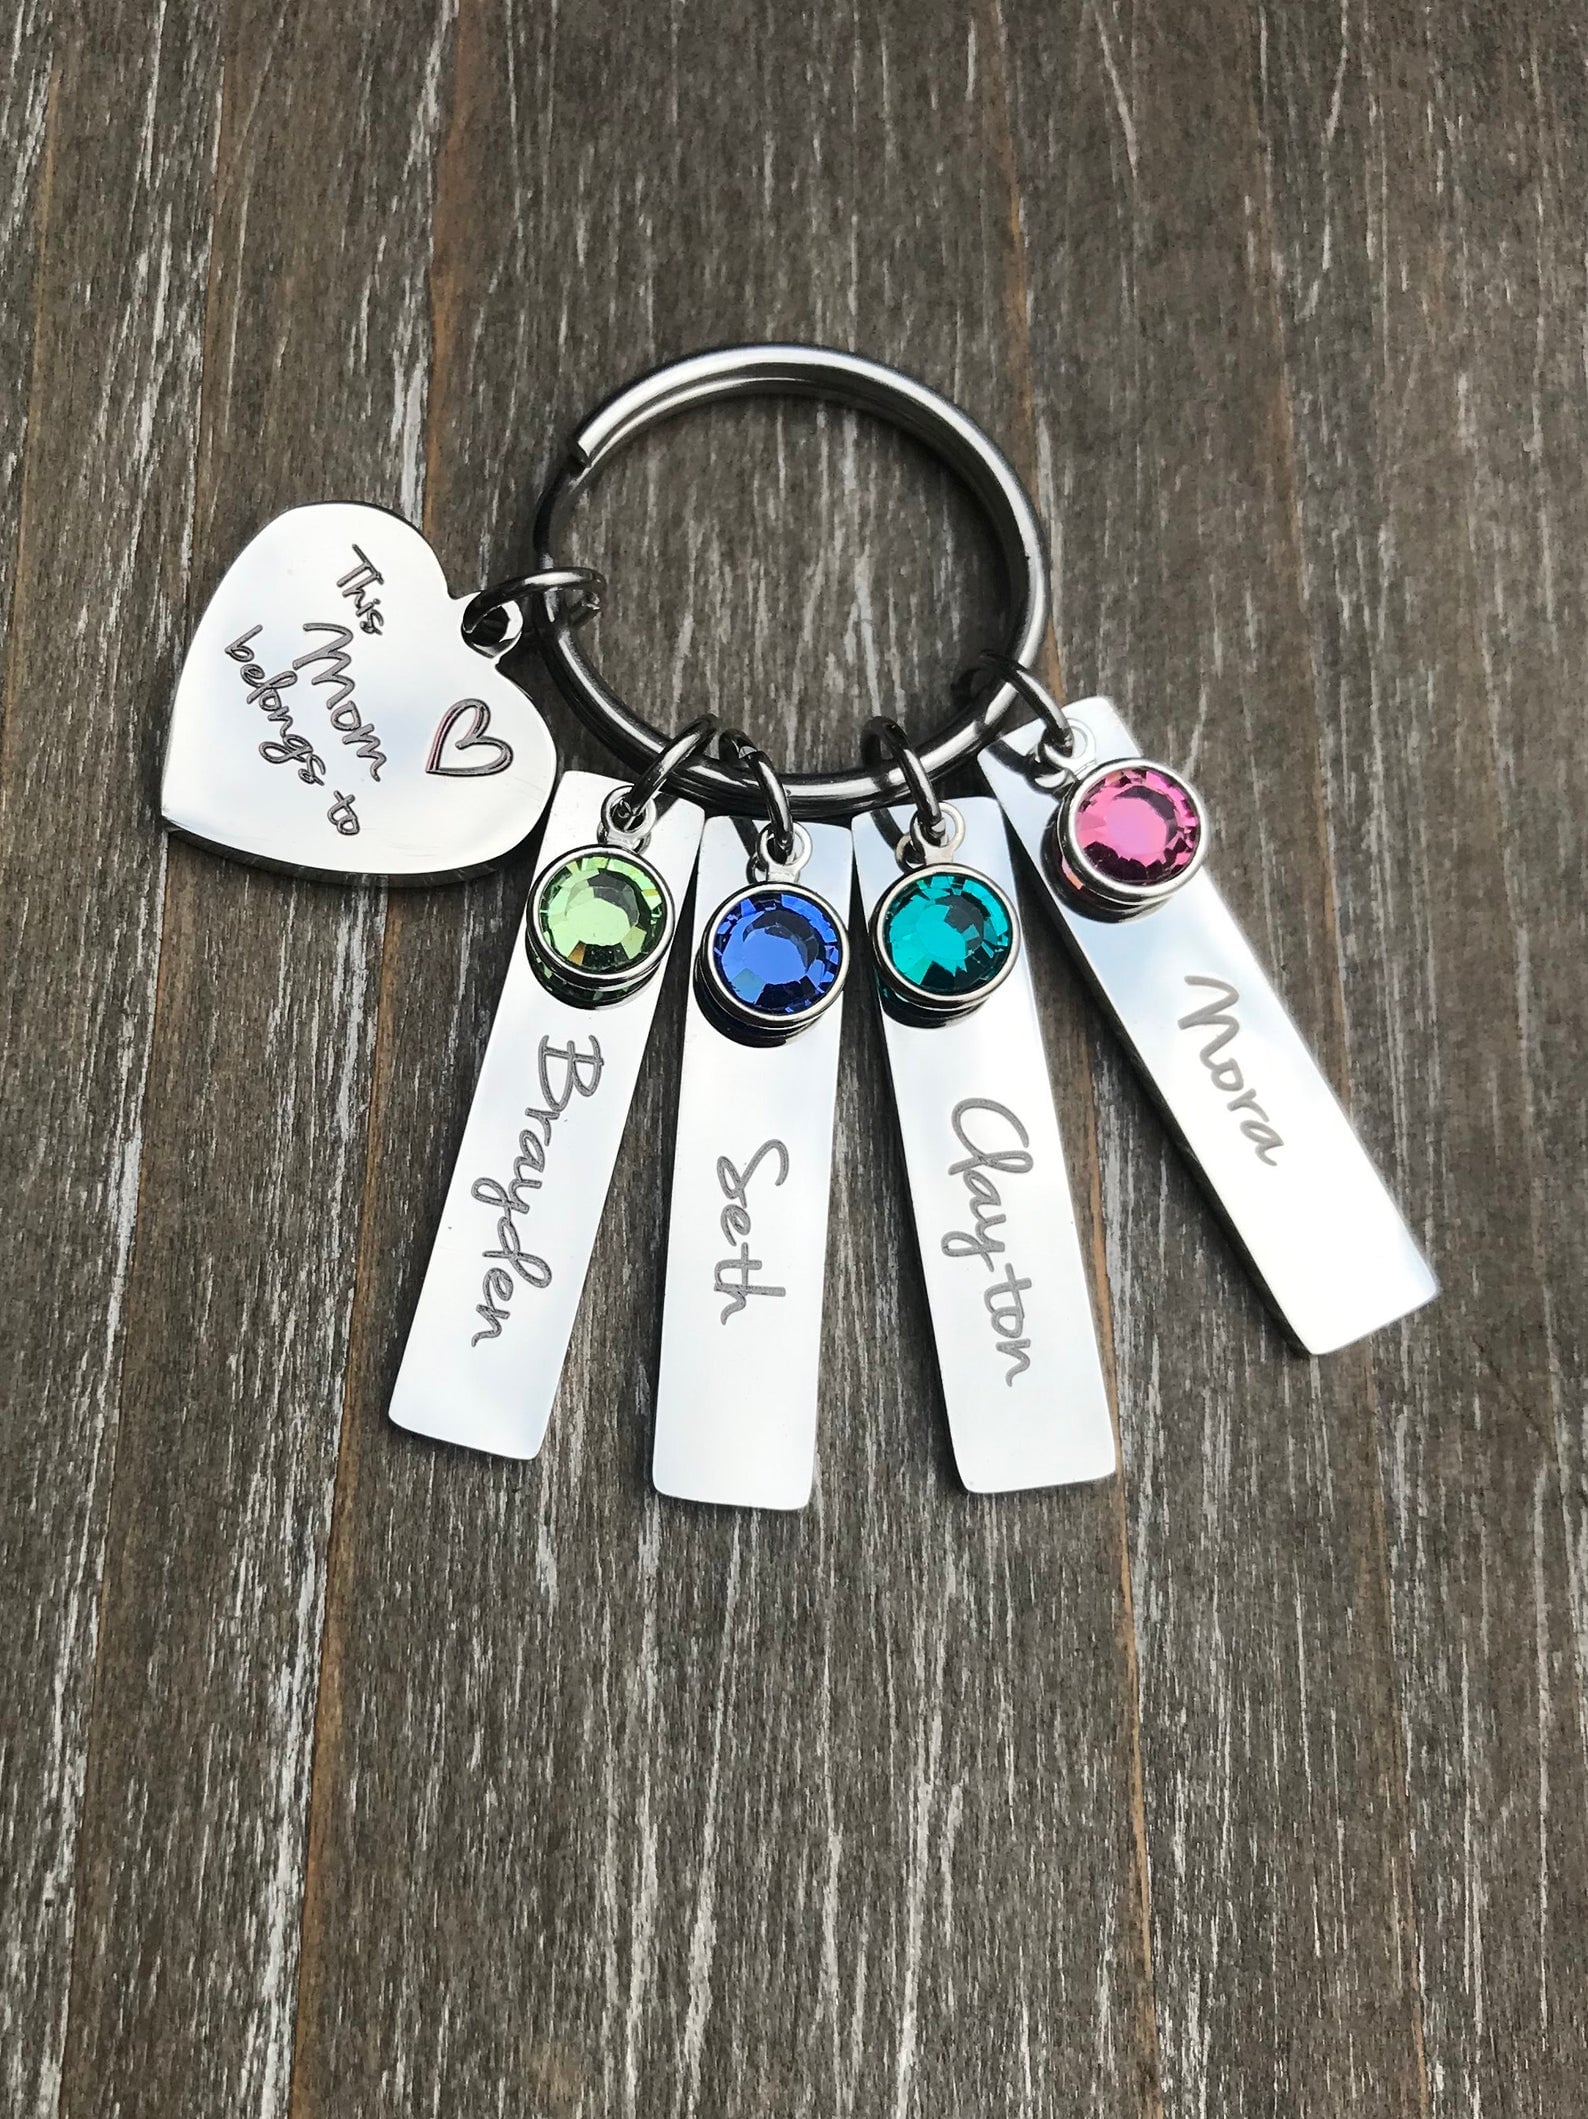 New Mom Jewelry - A Meaningful Gift for a Special Occasion Mothers day –  JWshinee